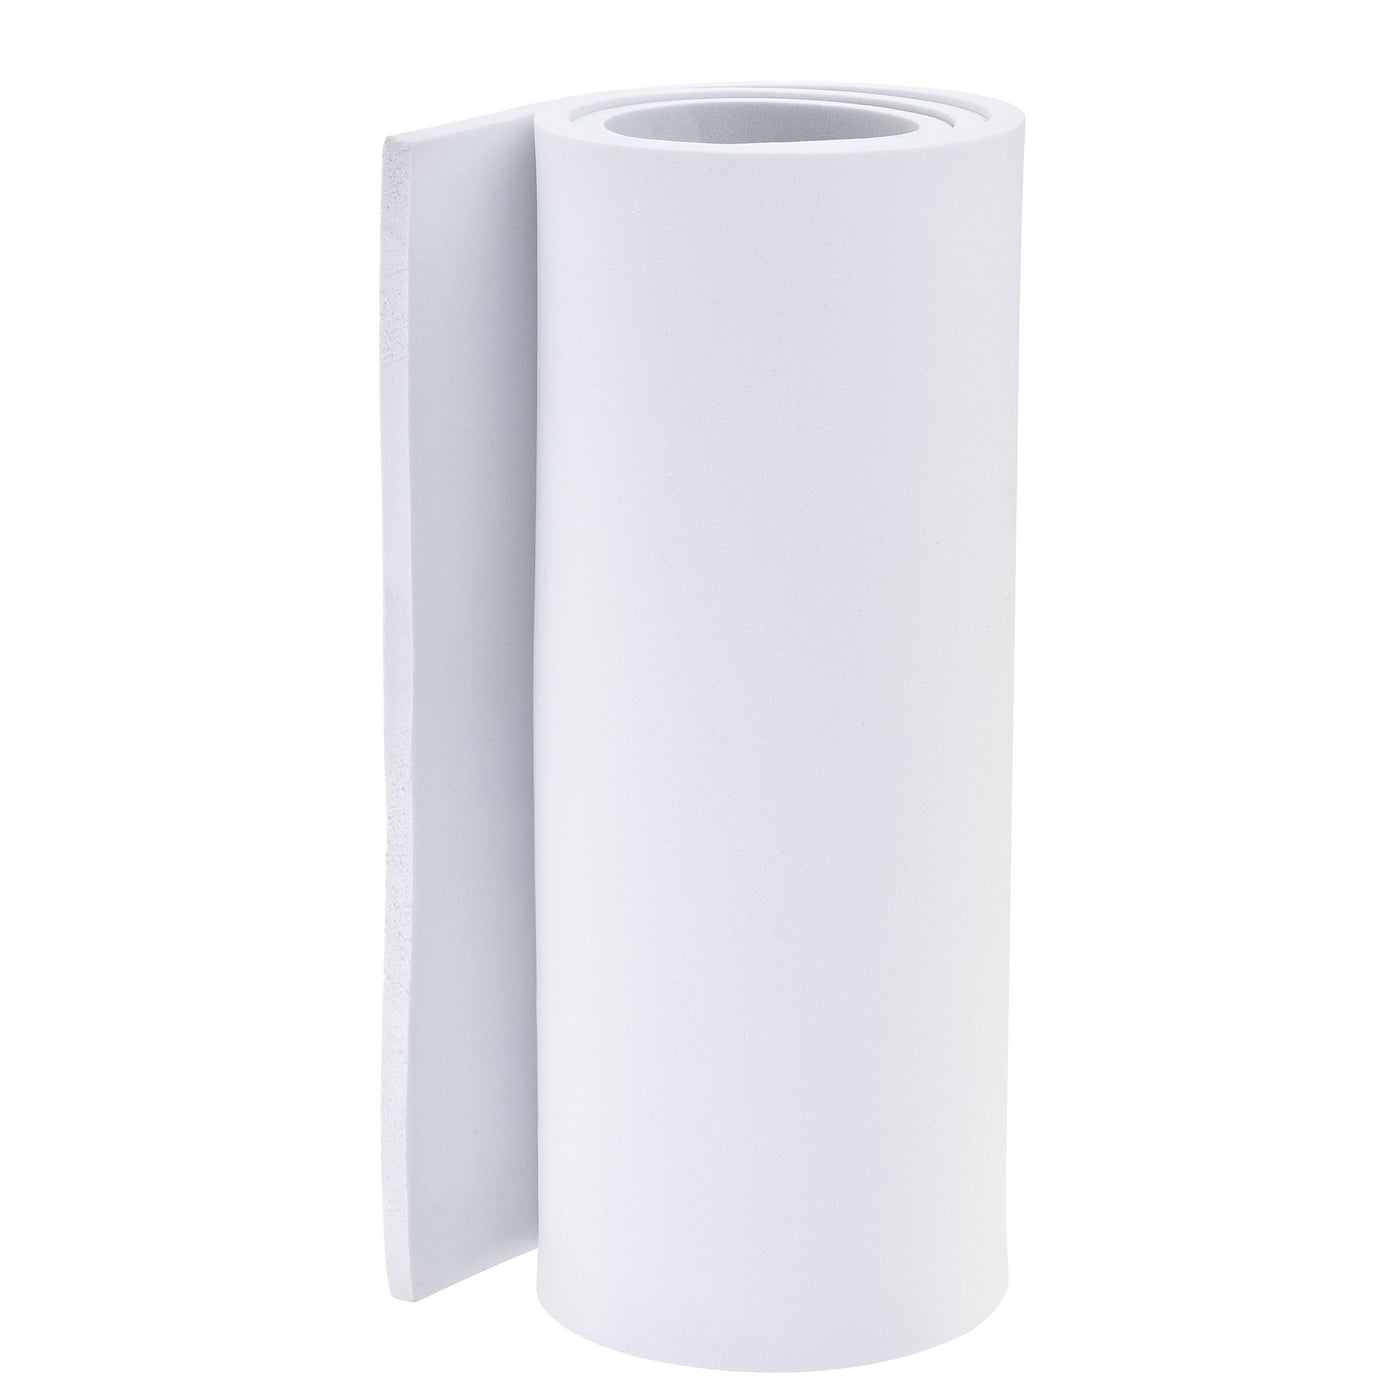 Uxcell Uxcell White EVA Foam Sheets Roll 13 x 39 Inch 10mm Thick for Crafts DIY Projects